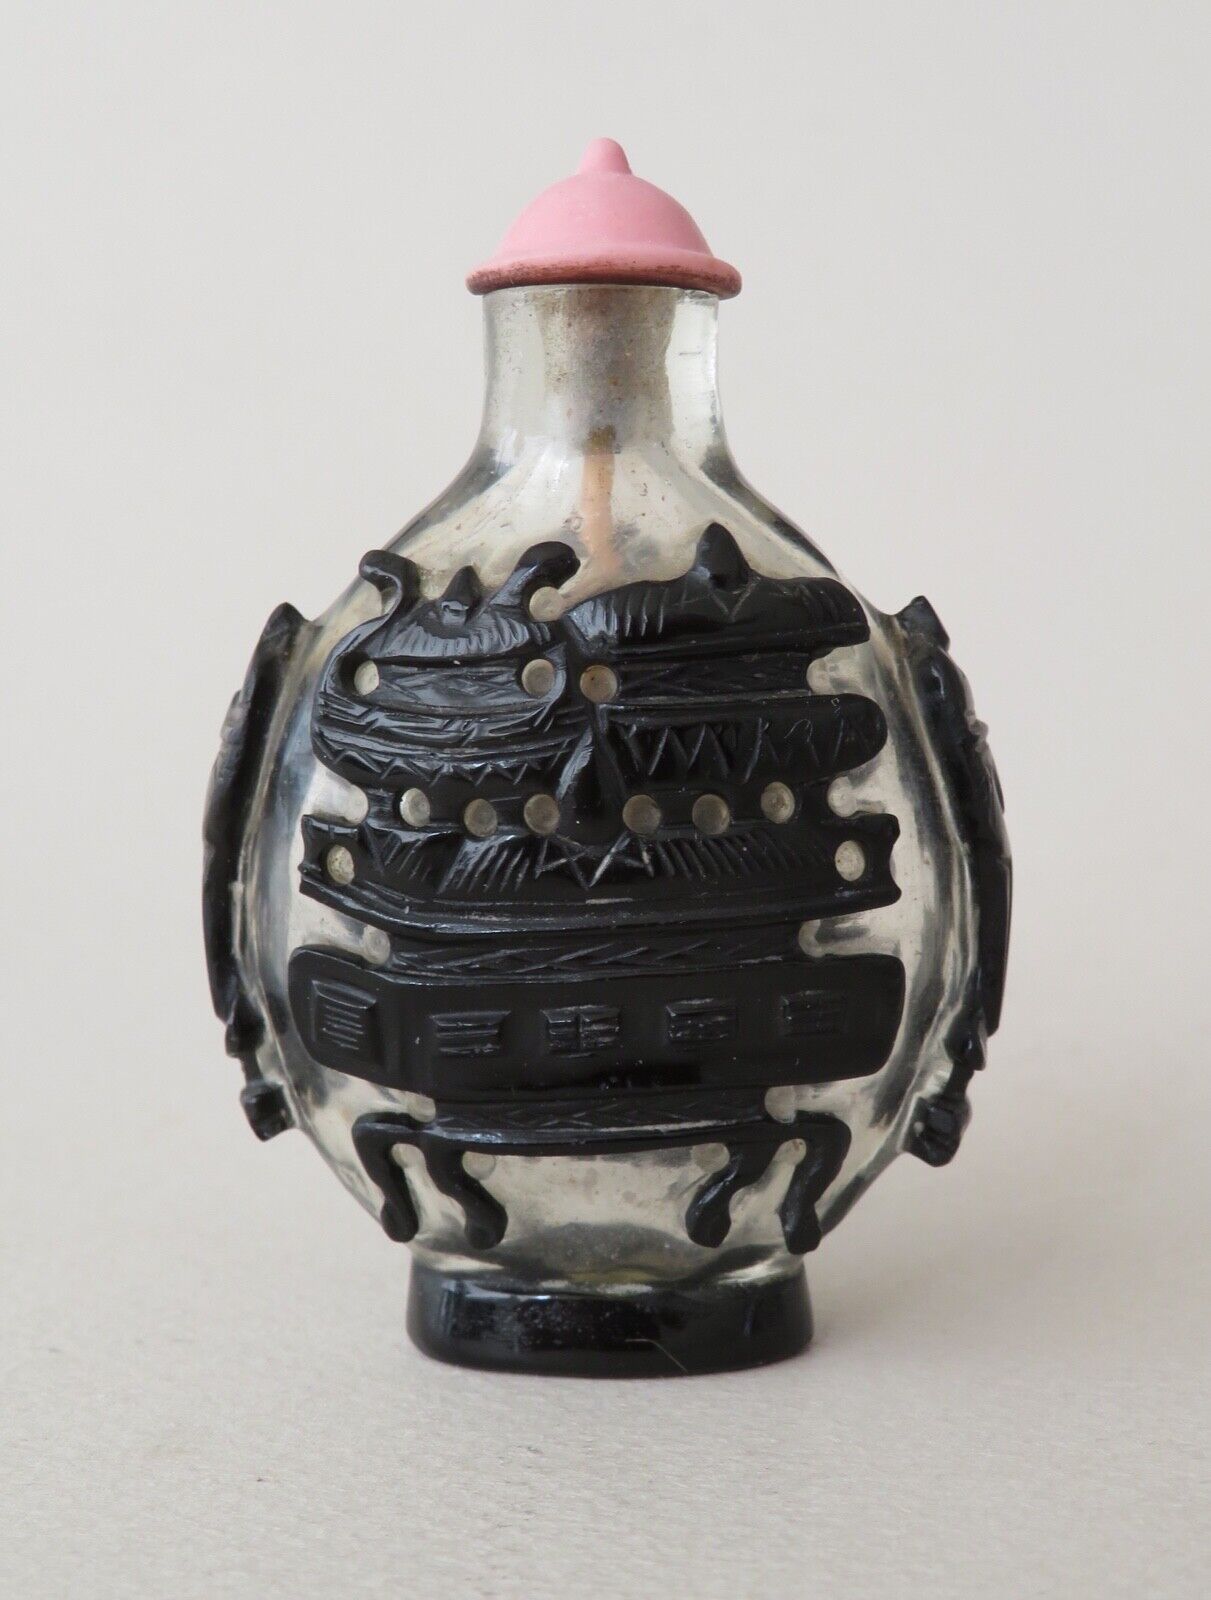 FINE ANTIQUE CHINESE SNUFF BOTTLE - BLACK CUT TO CLEAR GLASS, BRONZE DINGS MOTIF